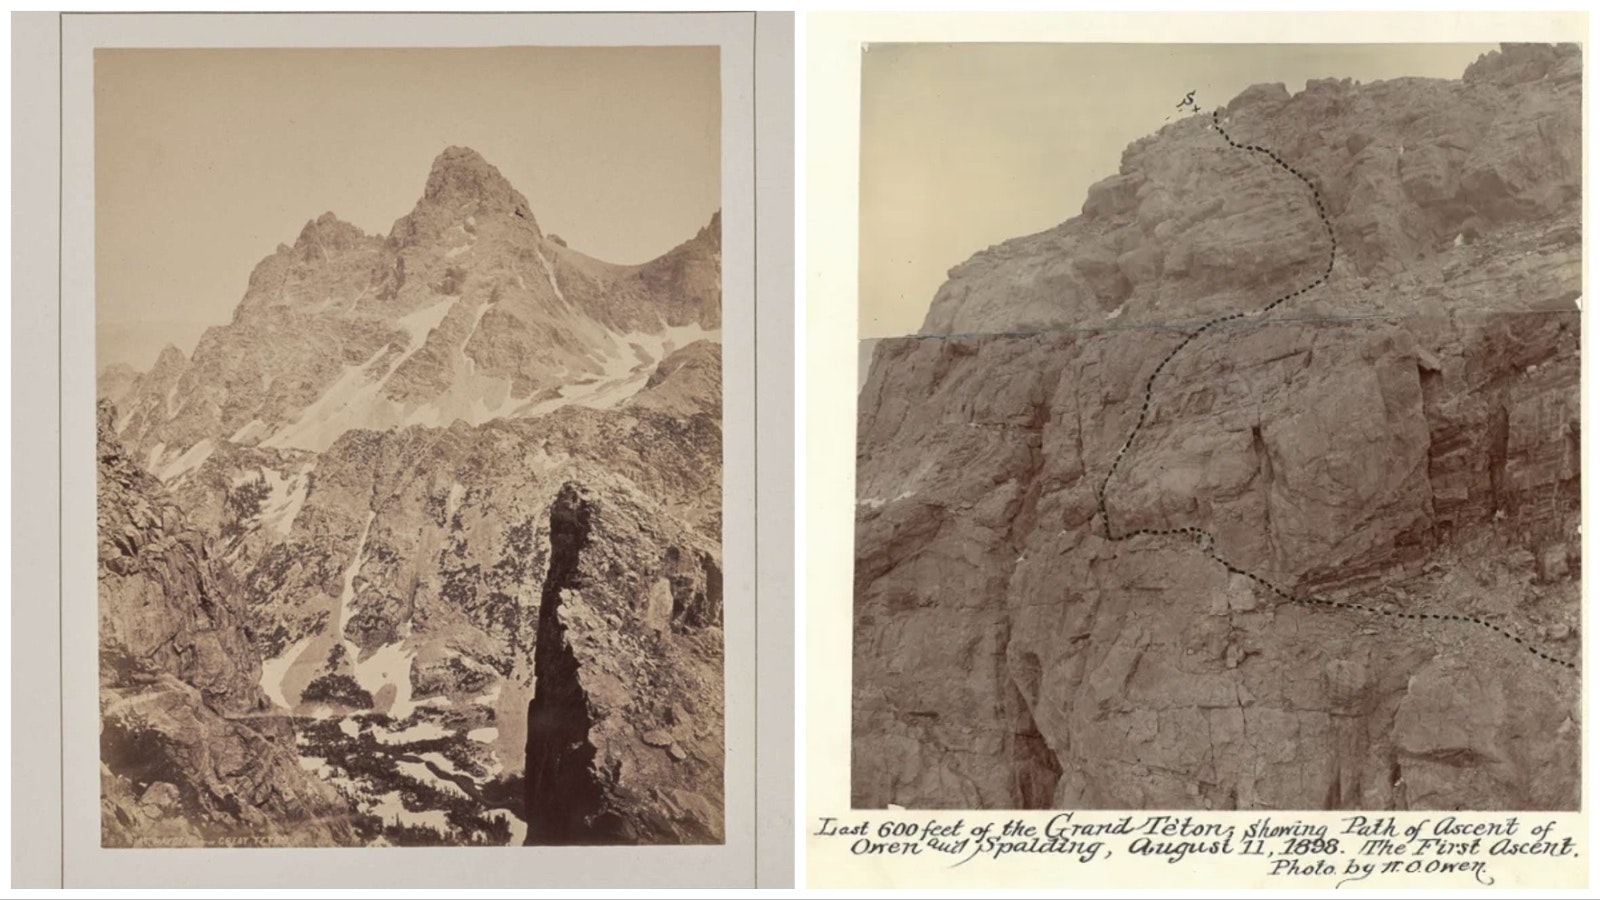 Grand Teton from the summit of Table Mountain on the Idaho side taken by Hayden Expedition photographer William H. Jackson in August 1872, left. At right, a Billy Owen photograph showing his party's route of ascent in 1898.